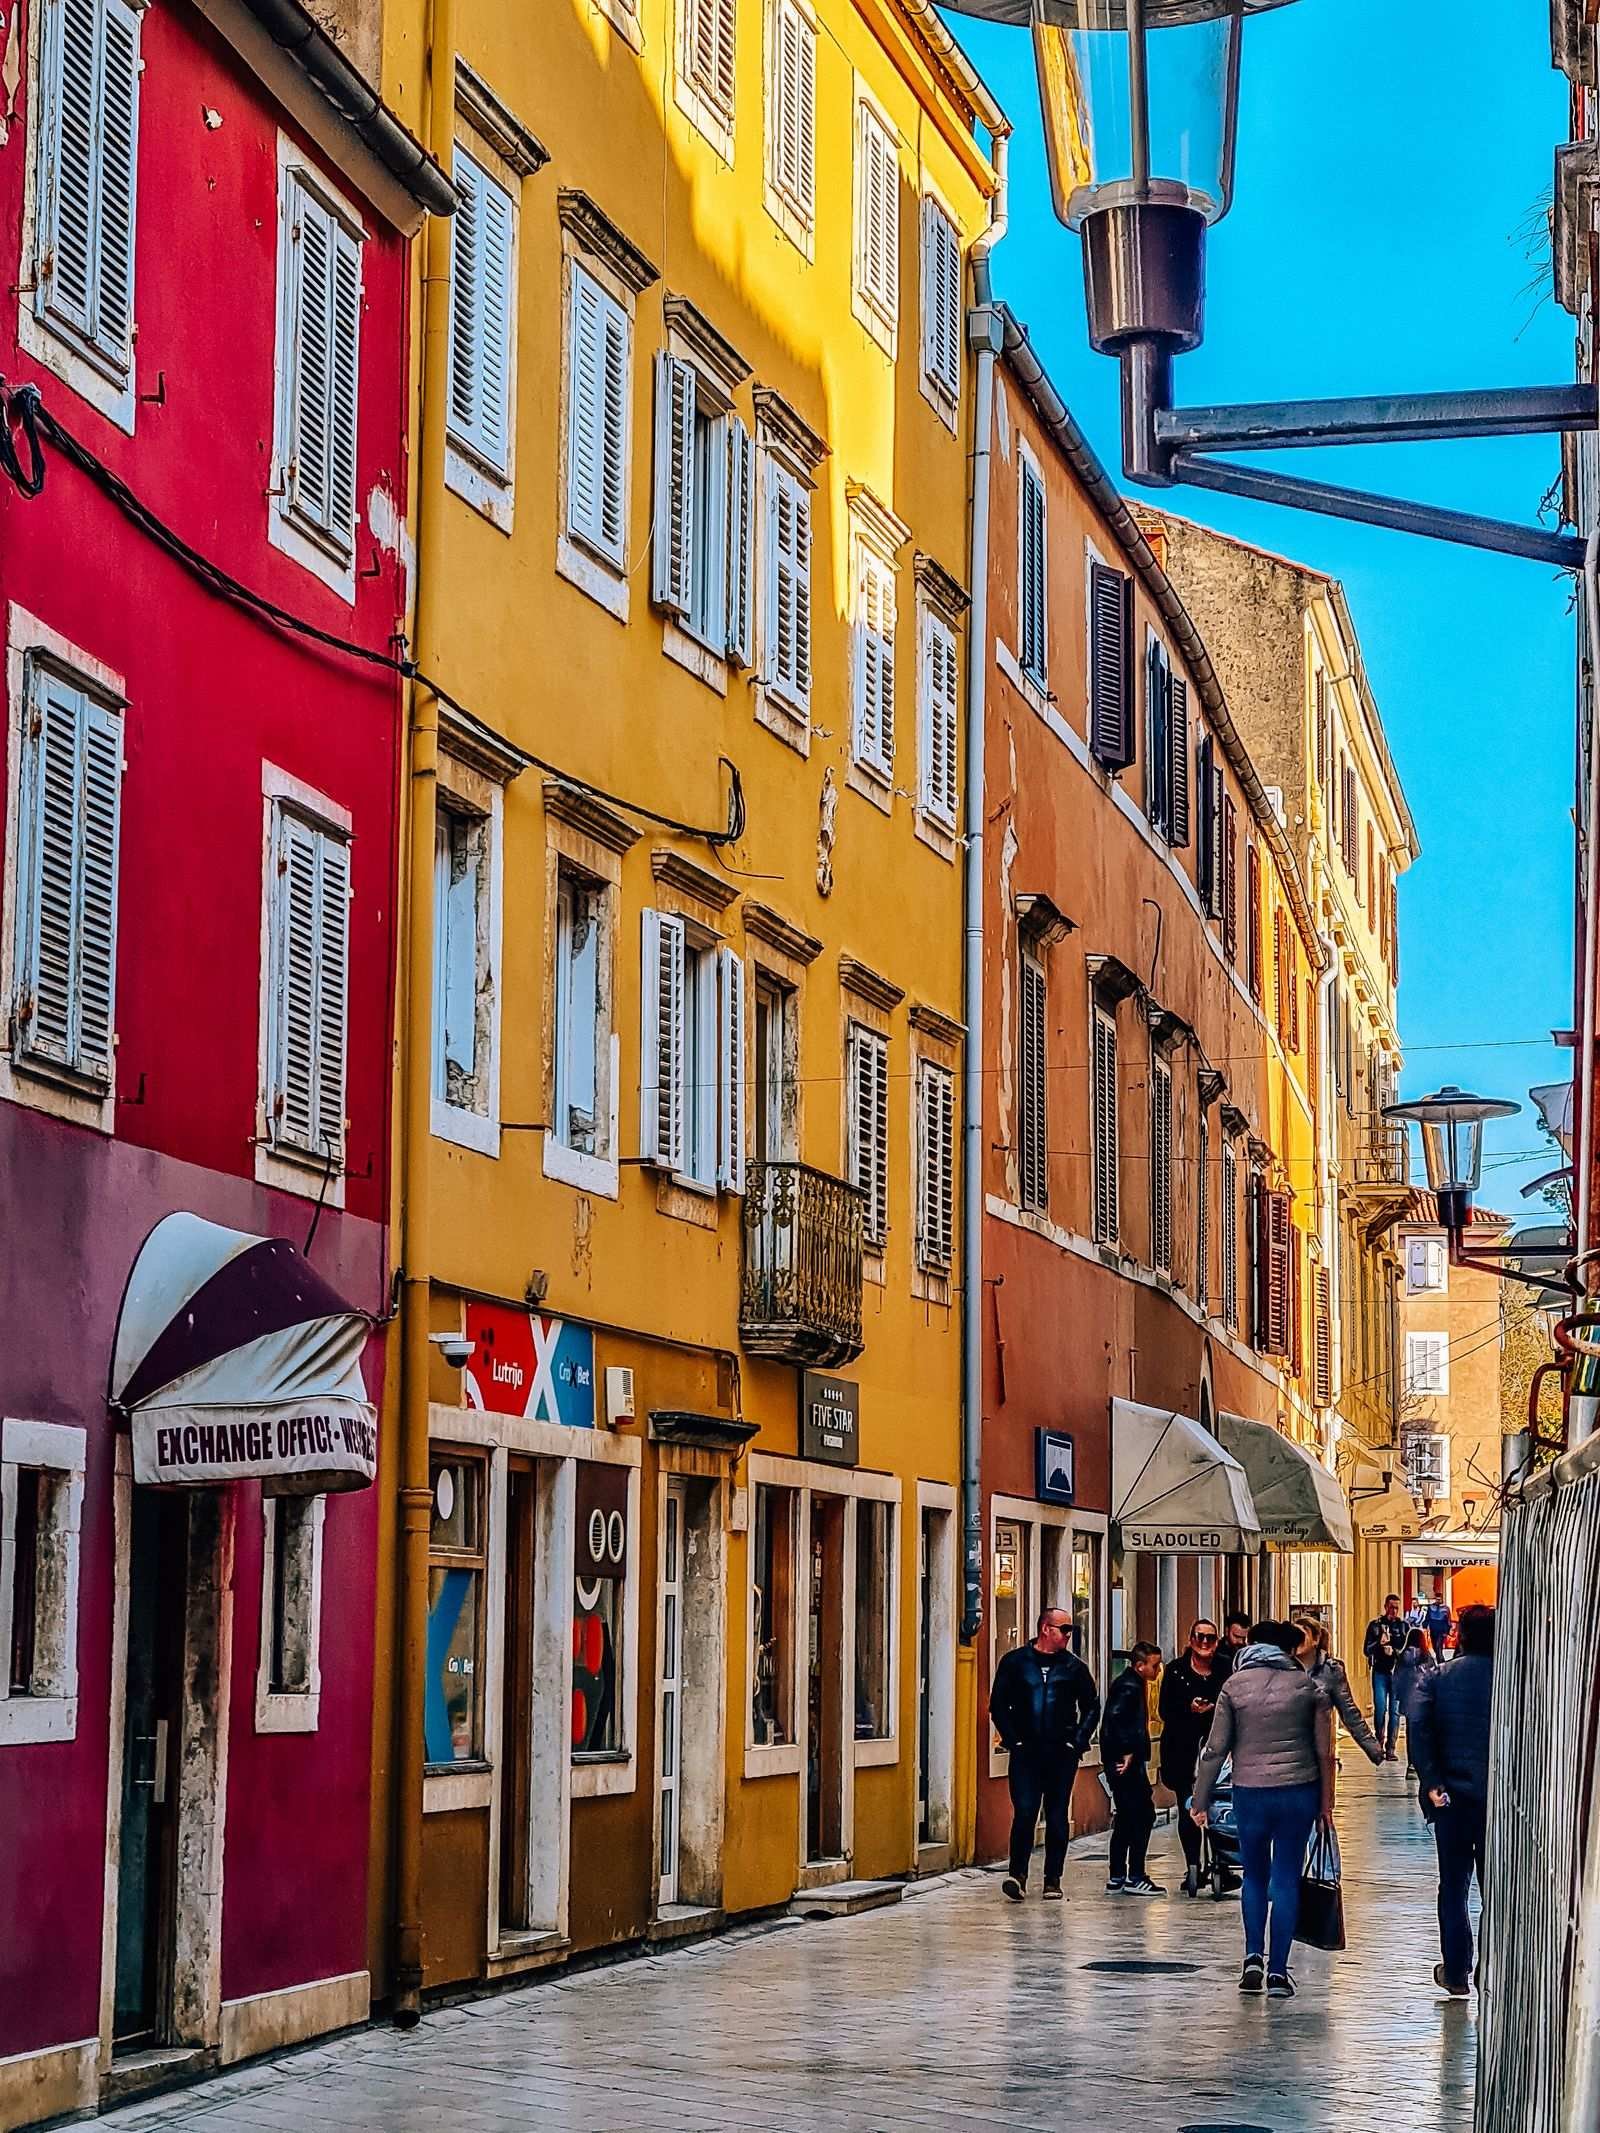 A colourful pedestrian street with people walking down on a sunny day, buildings are red, yellow and orange